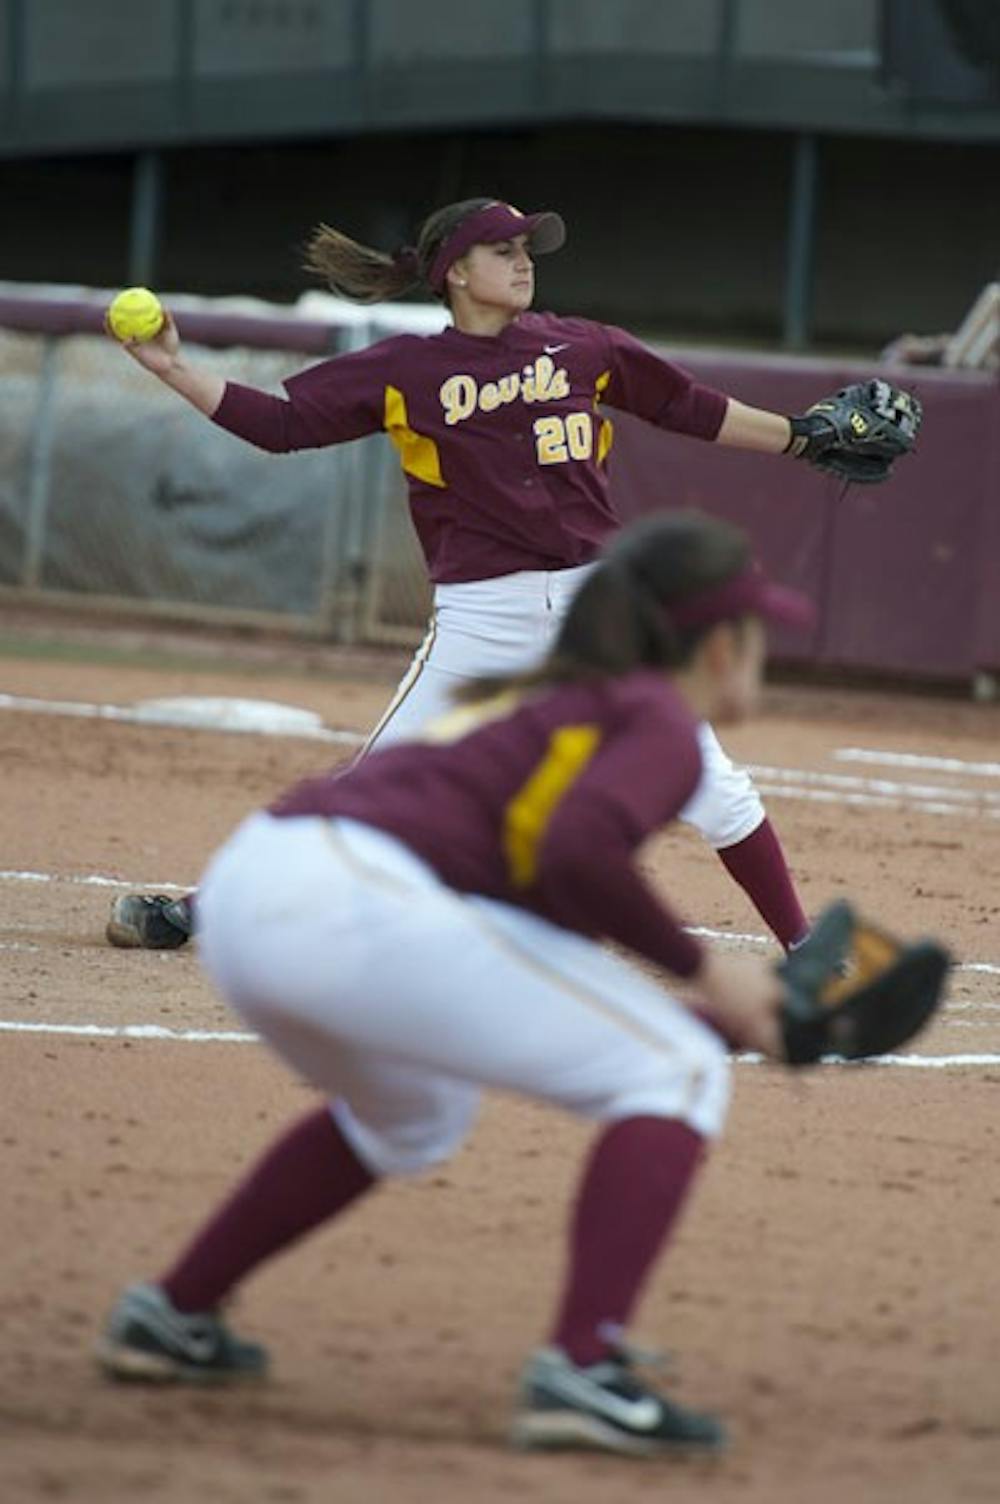 SPECIAL DELIVERY: ASU freshman Sam Parlich throws a pitch during the Sun Devils' win over Rutgers last month. (Photo by Michael Arellano)